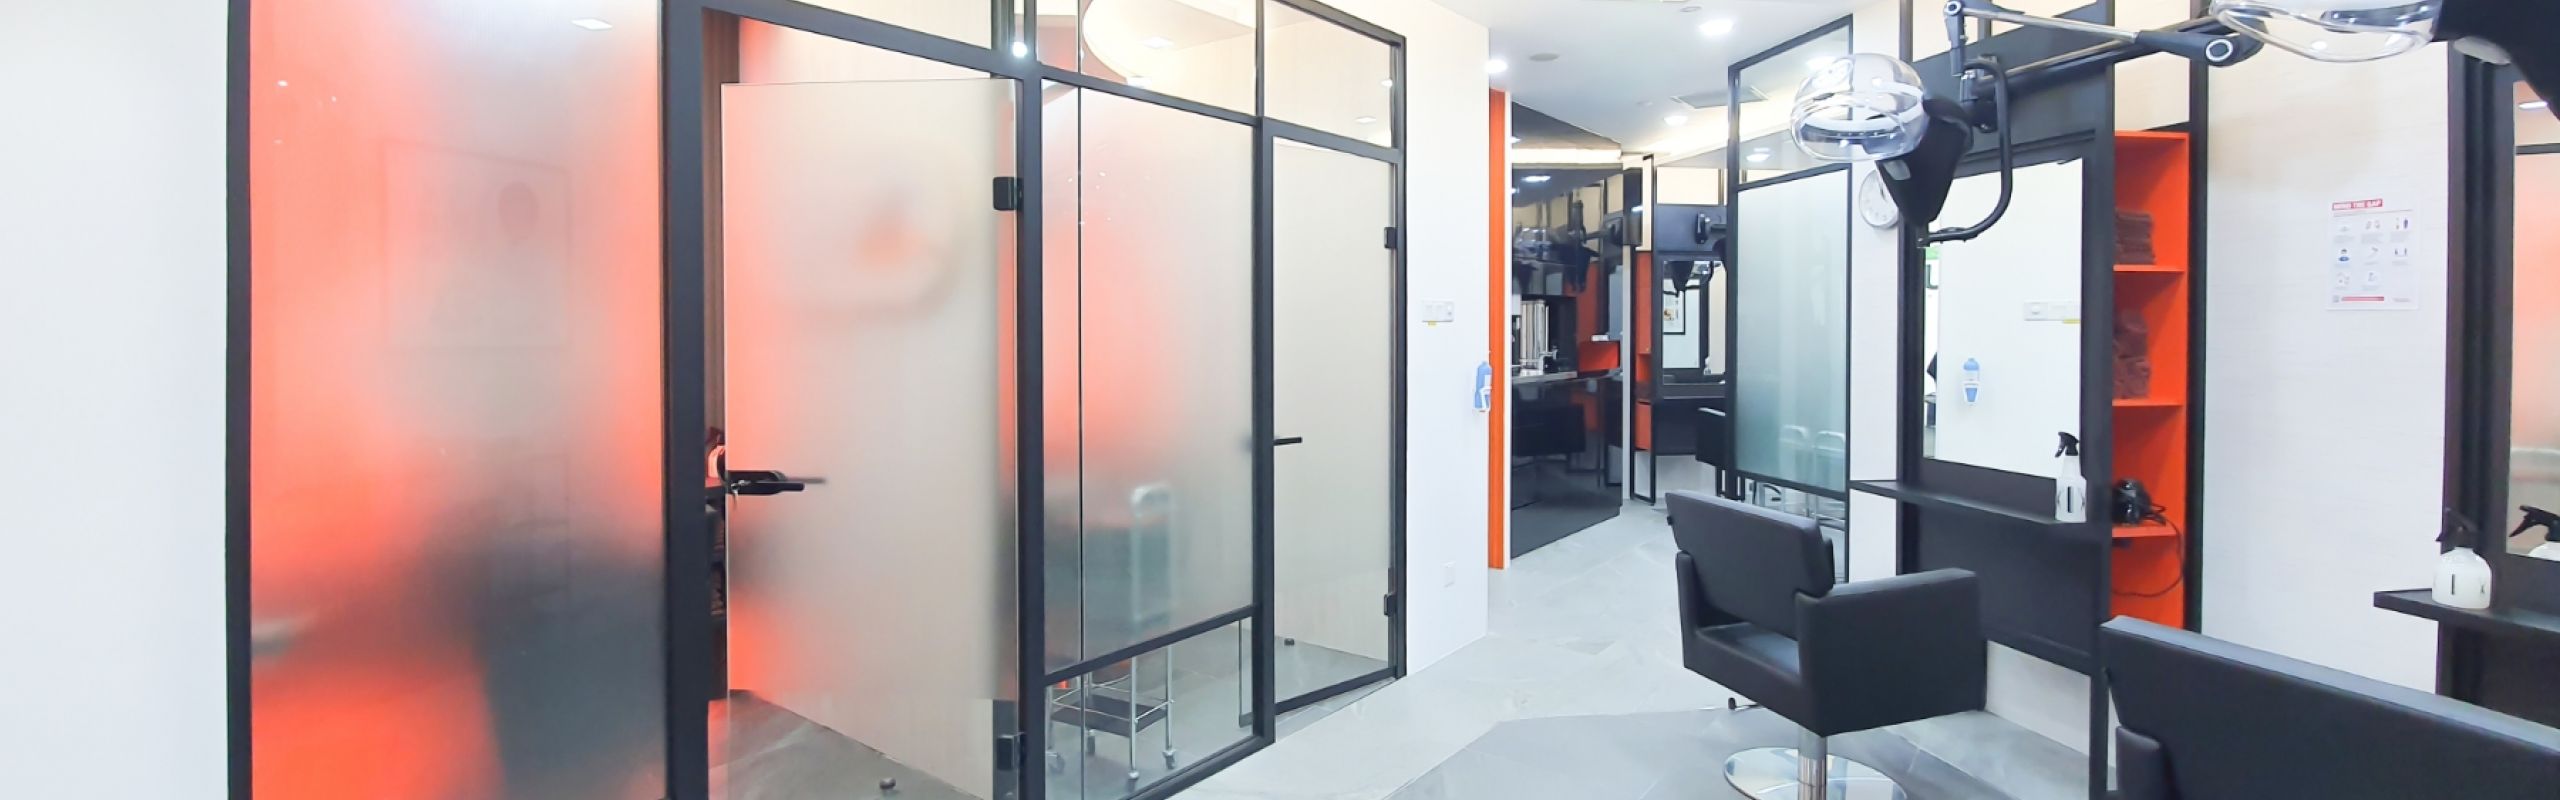 Managing Acoustics in a Retail Space with Glass Partitions